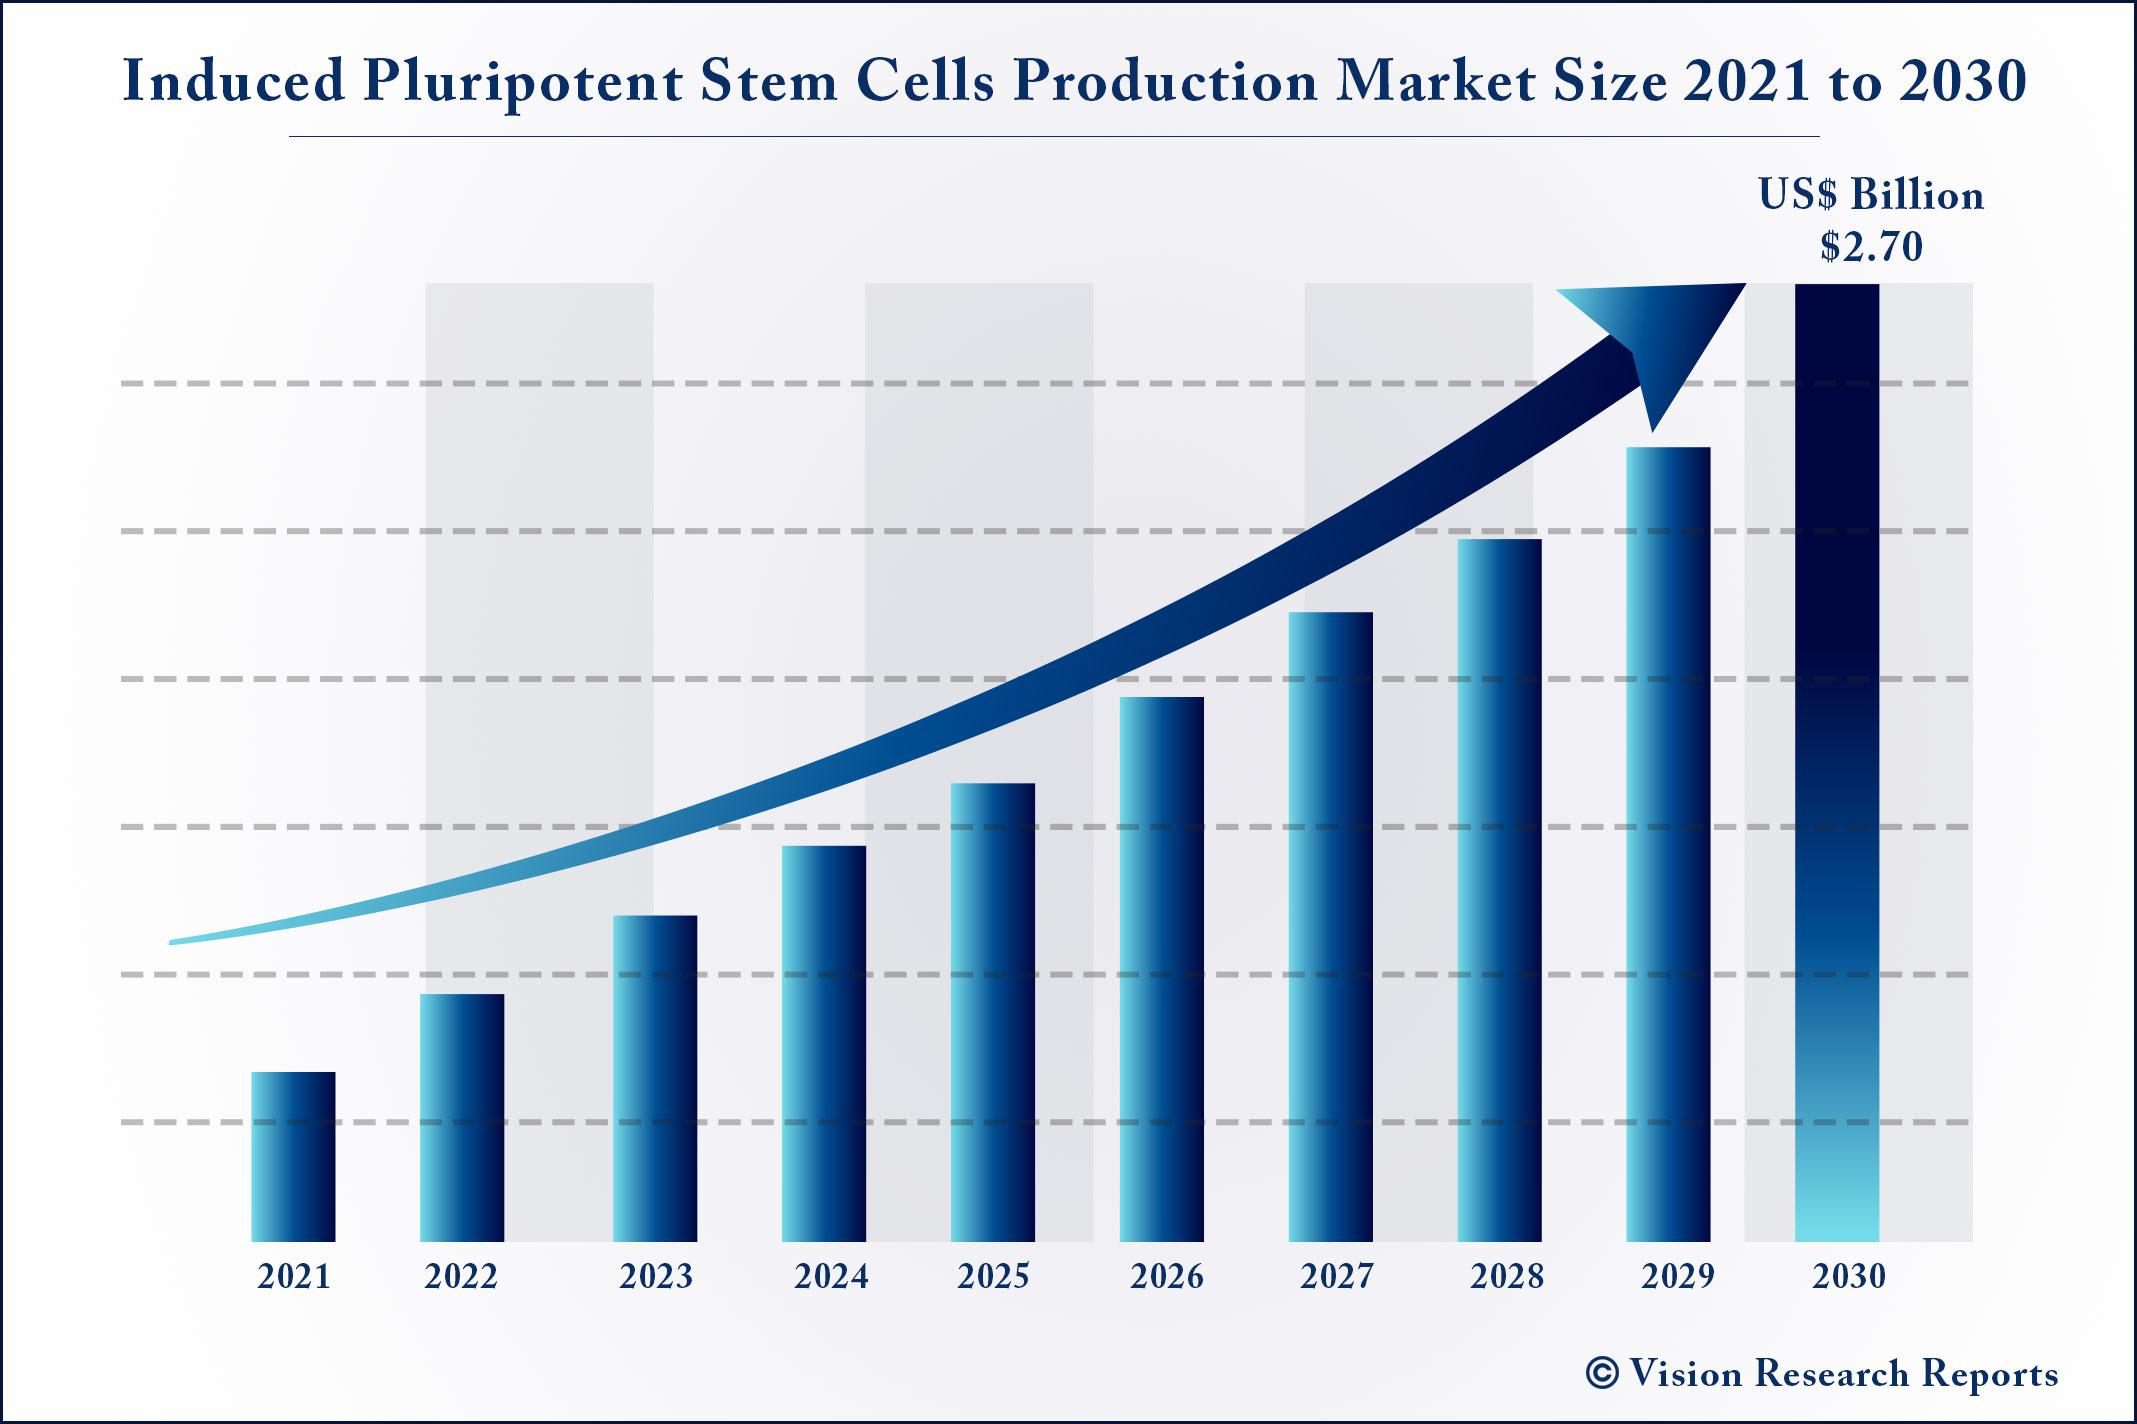 Induced Pluripotent Stem Cells Production Market Size 2021 to 2030